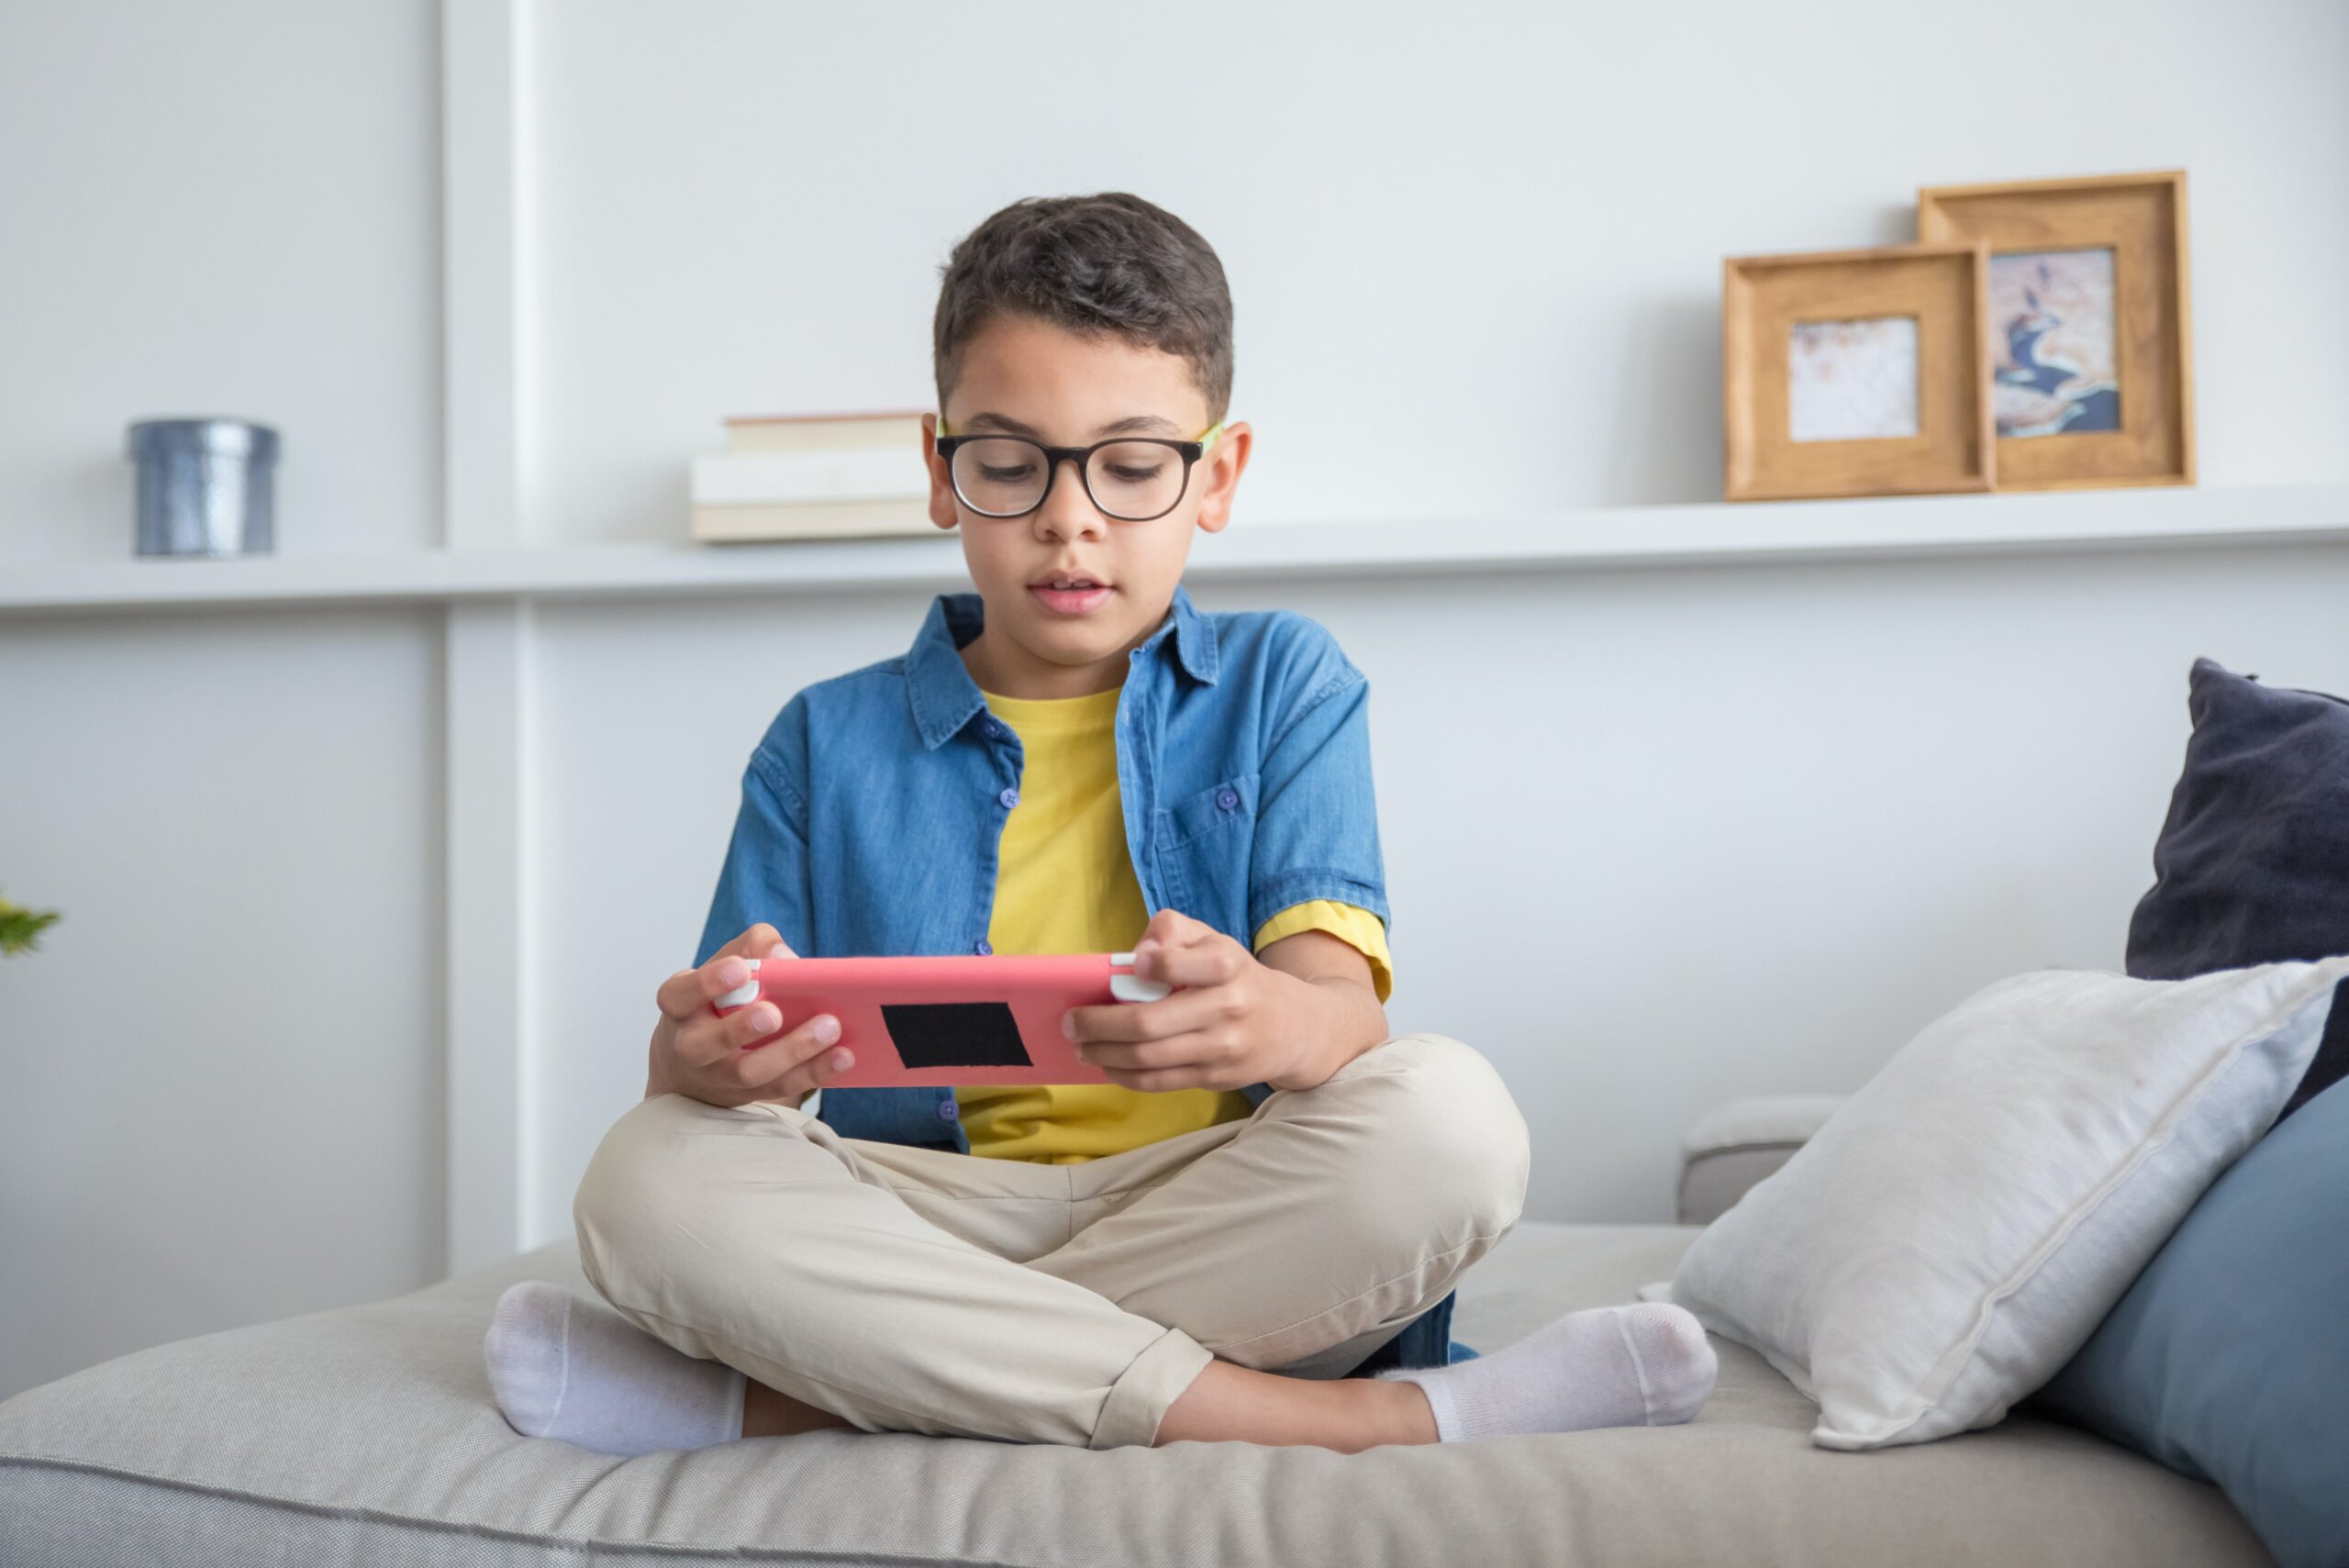 Ipsos Said Children Are Spending €39 Monthly On In-Game Purchases